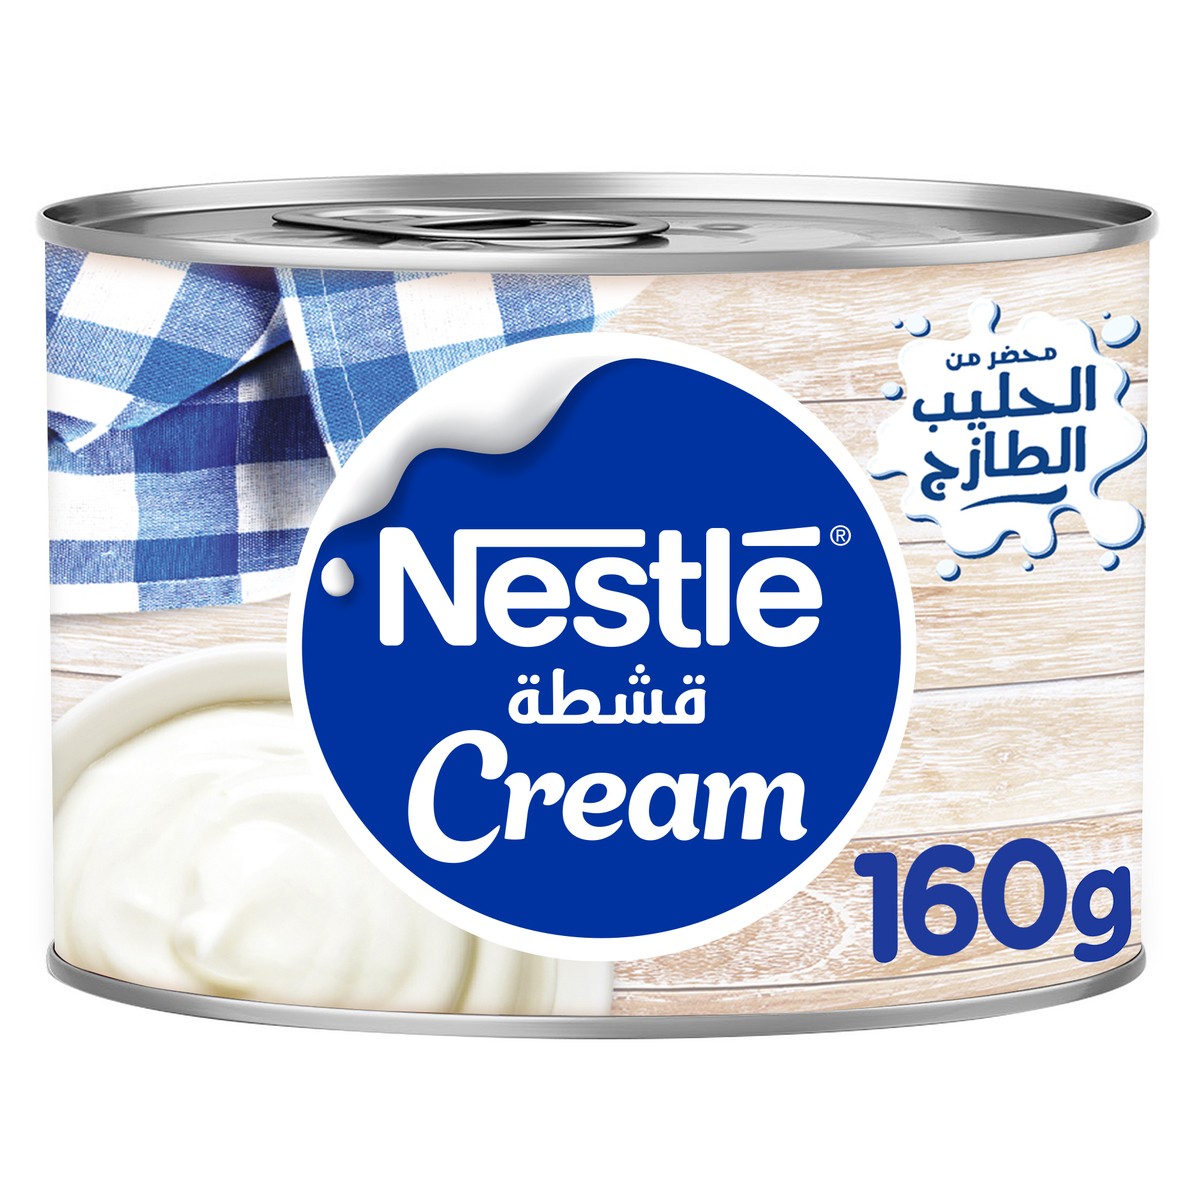 Buy Nestle Cream Original 160 g Online at Best Price | Other Dairy Products | Lulu Egypt in Kuwait